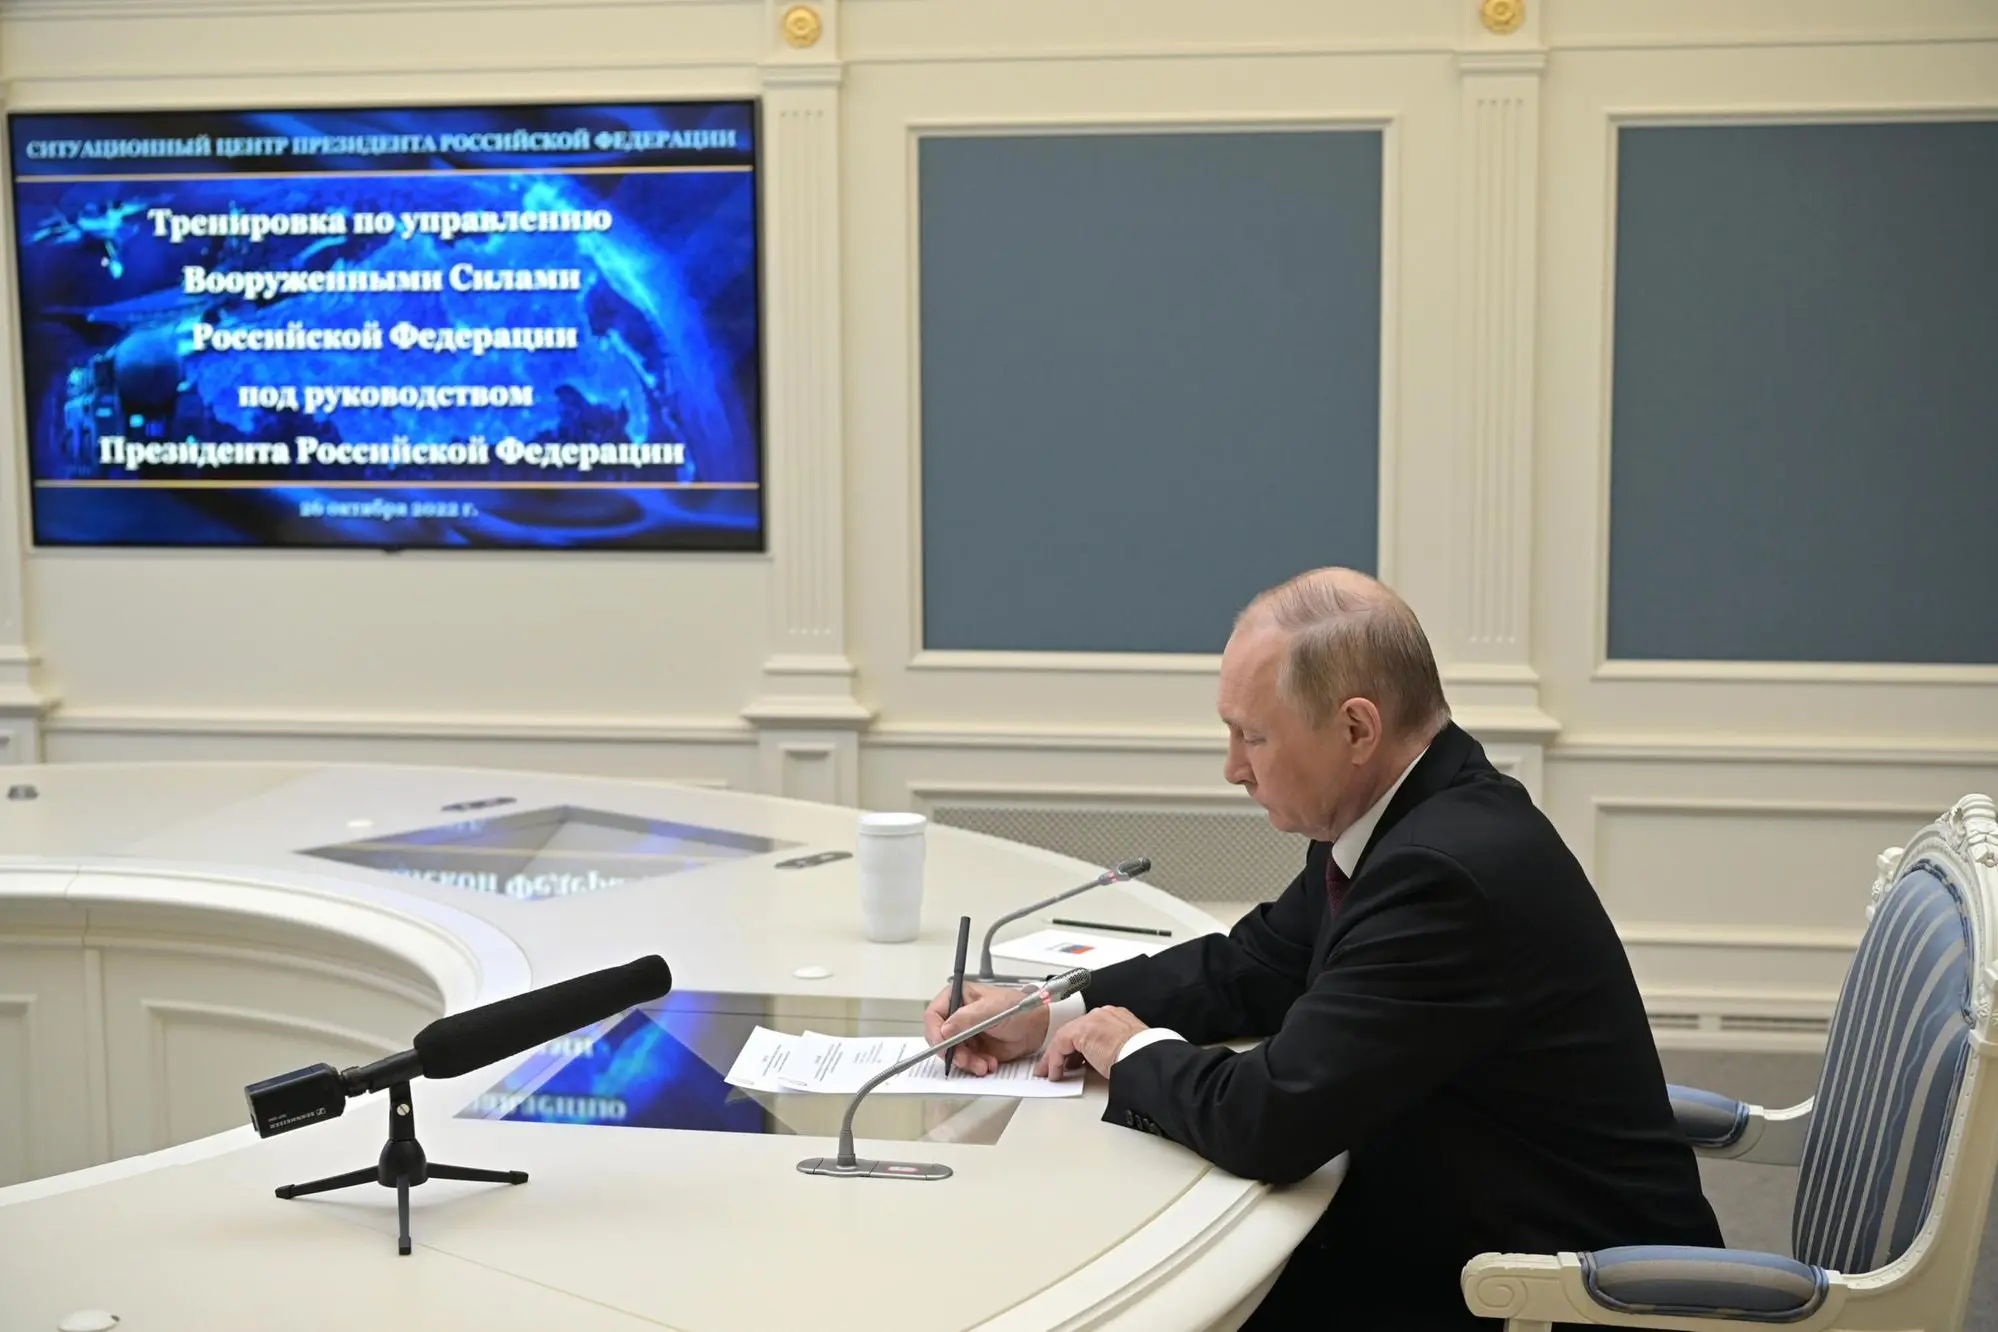 epa10266919 Russian President and Supreme Commander-in-Chief of the Russian Armed Forces Vladimir Putin attends a training to test the Russian strategic deterrence forces via a video link at the Kremlin in Moscow, Russia, 26 October 2022. EPA/ALEXEI BABUSHKIN / KREMLIN POOL / SPUTNIK / POOL MANDATORY CREDIT